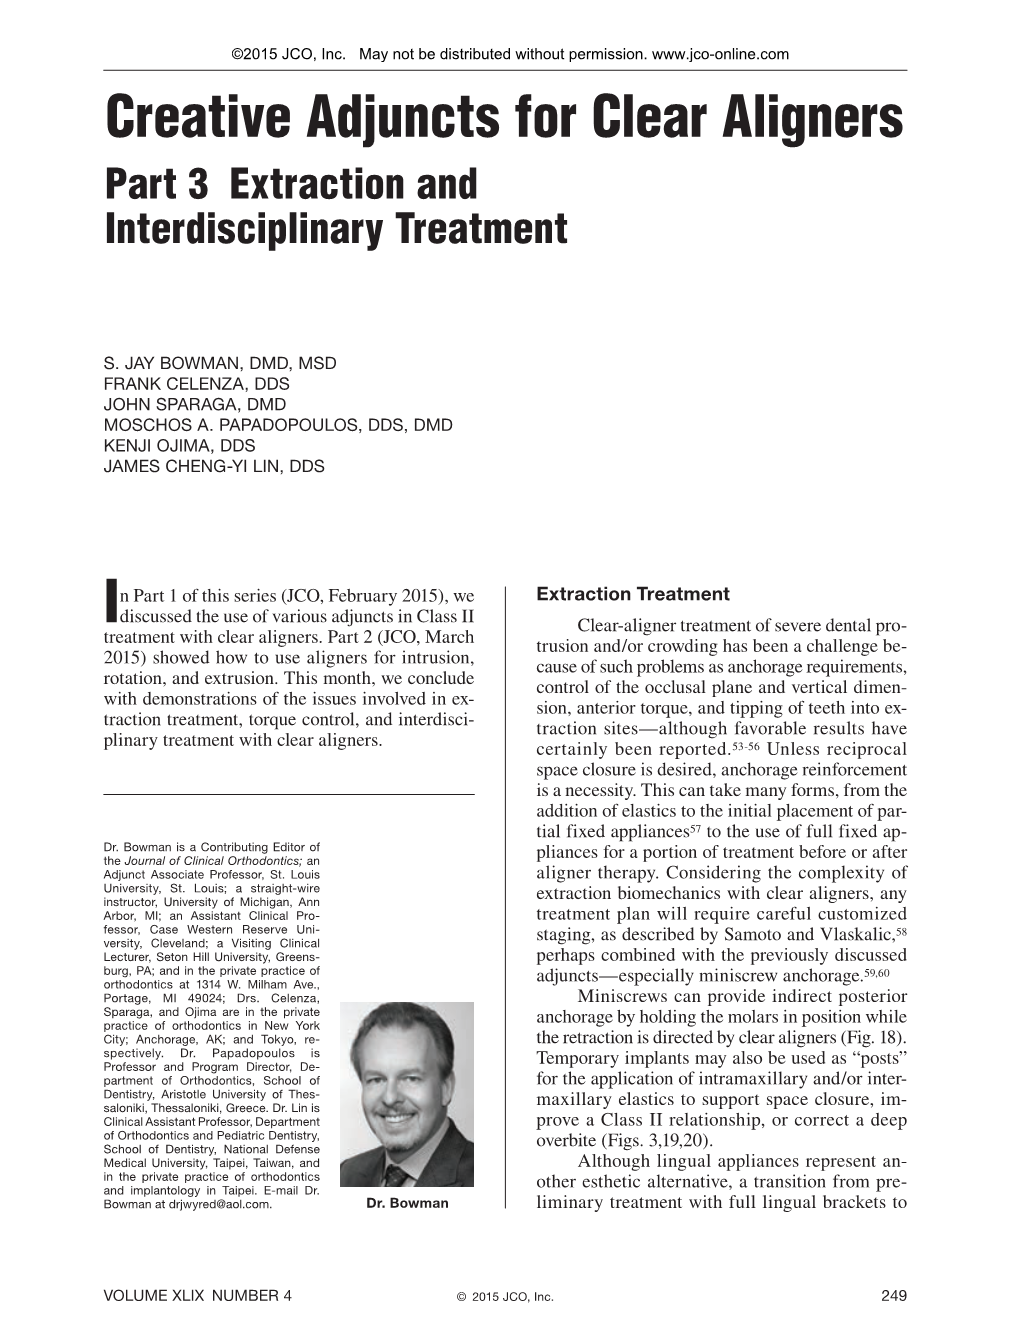 Creative Adjuncts for Clear Aligners Part 3 Extraction and Interdisciplinary Treatment